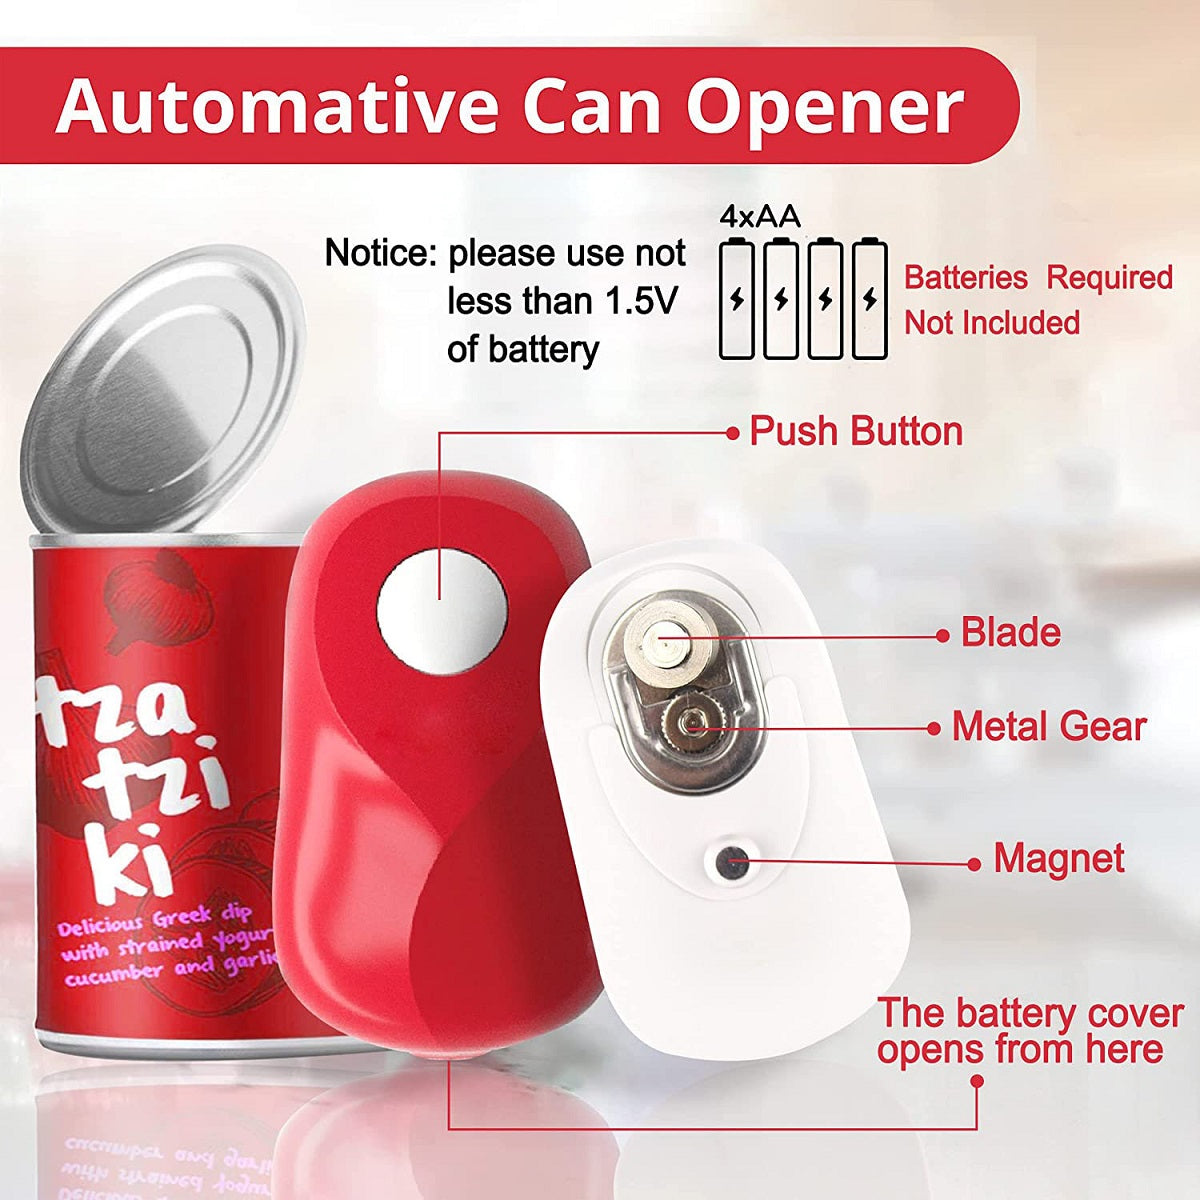 Kratax One Touch Can Opener: Auto Stop When Finished, Ergonomic, Smooth Edge,  Food-Safe, Battery Operated Can Opener, Red Electric Can Opener 